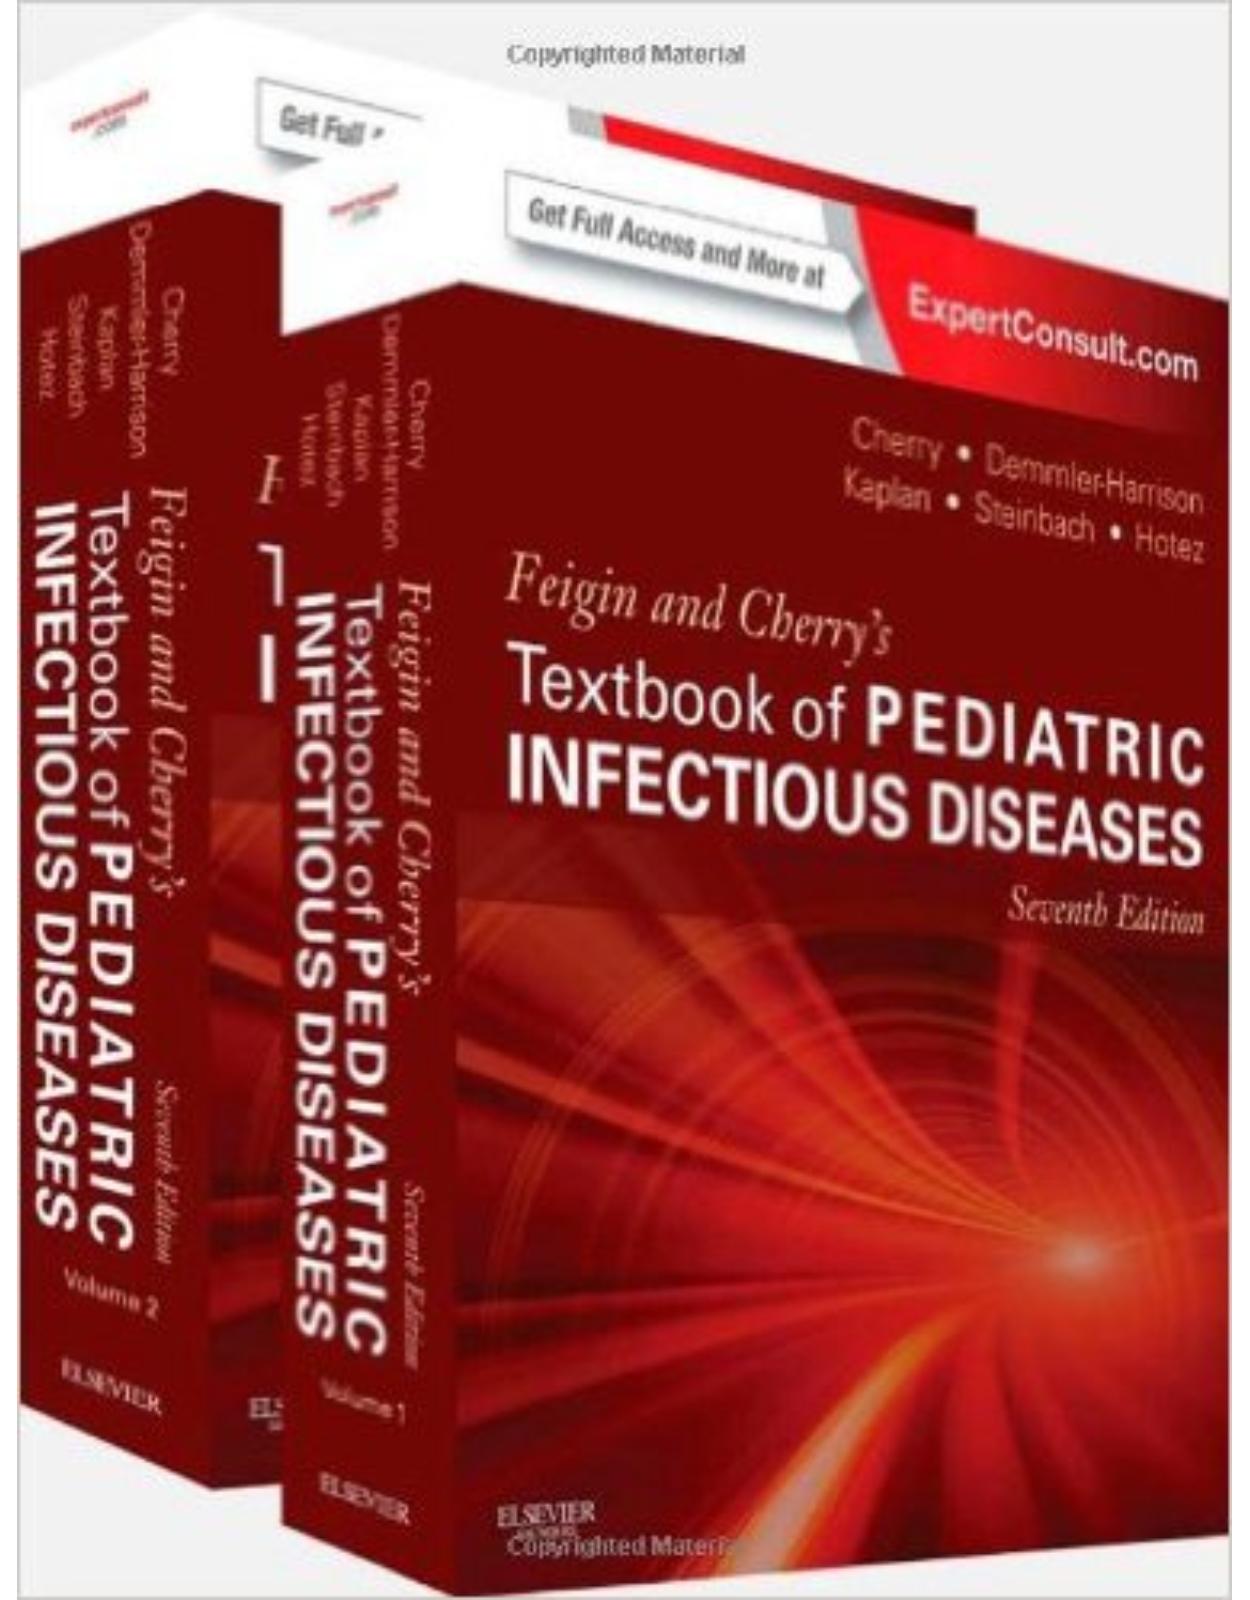 Feigin and Cherry's Textbook of Pediatric Infectious Diseases, 7th Edition 